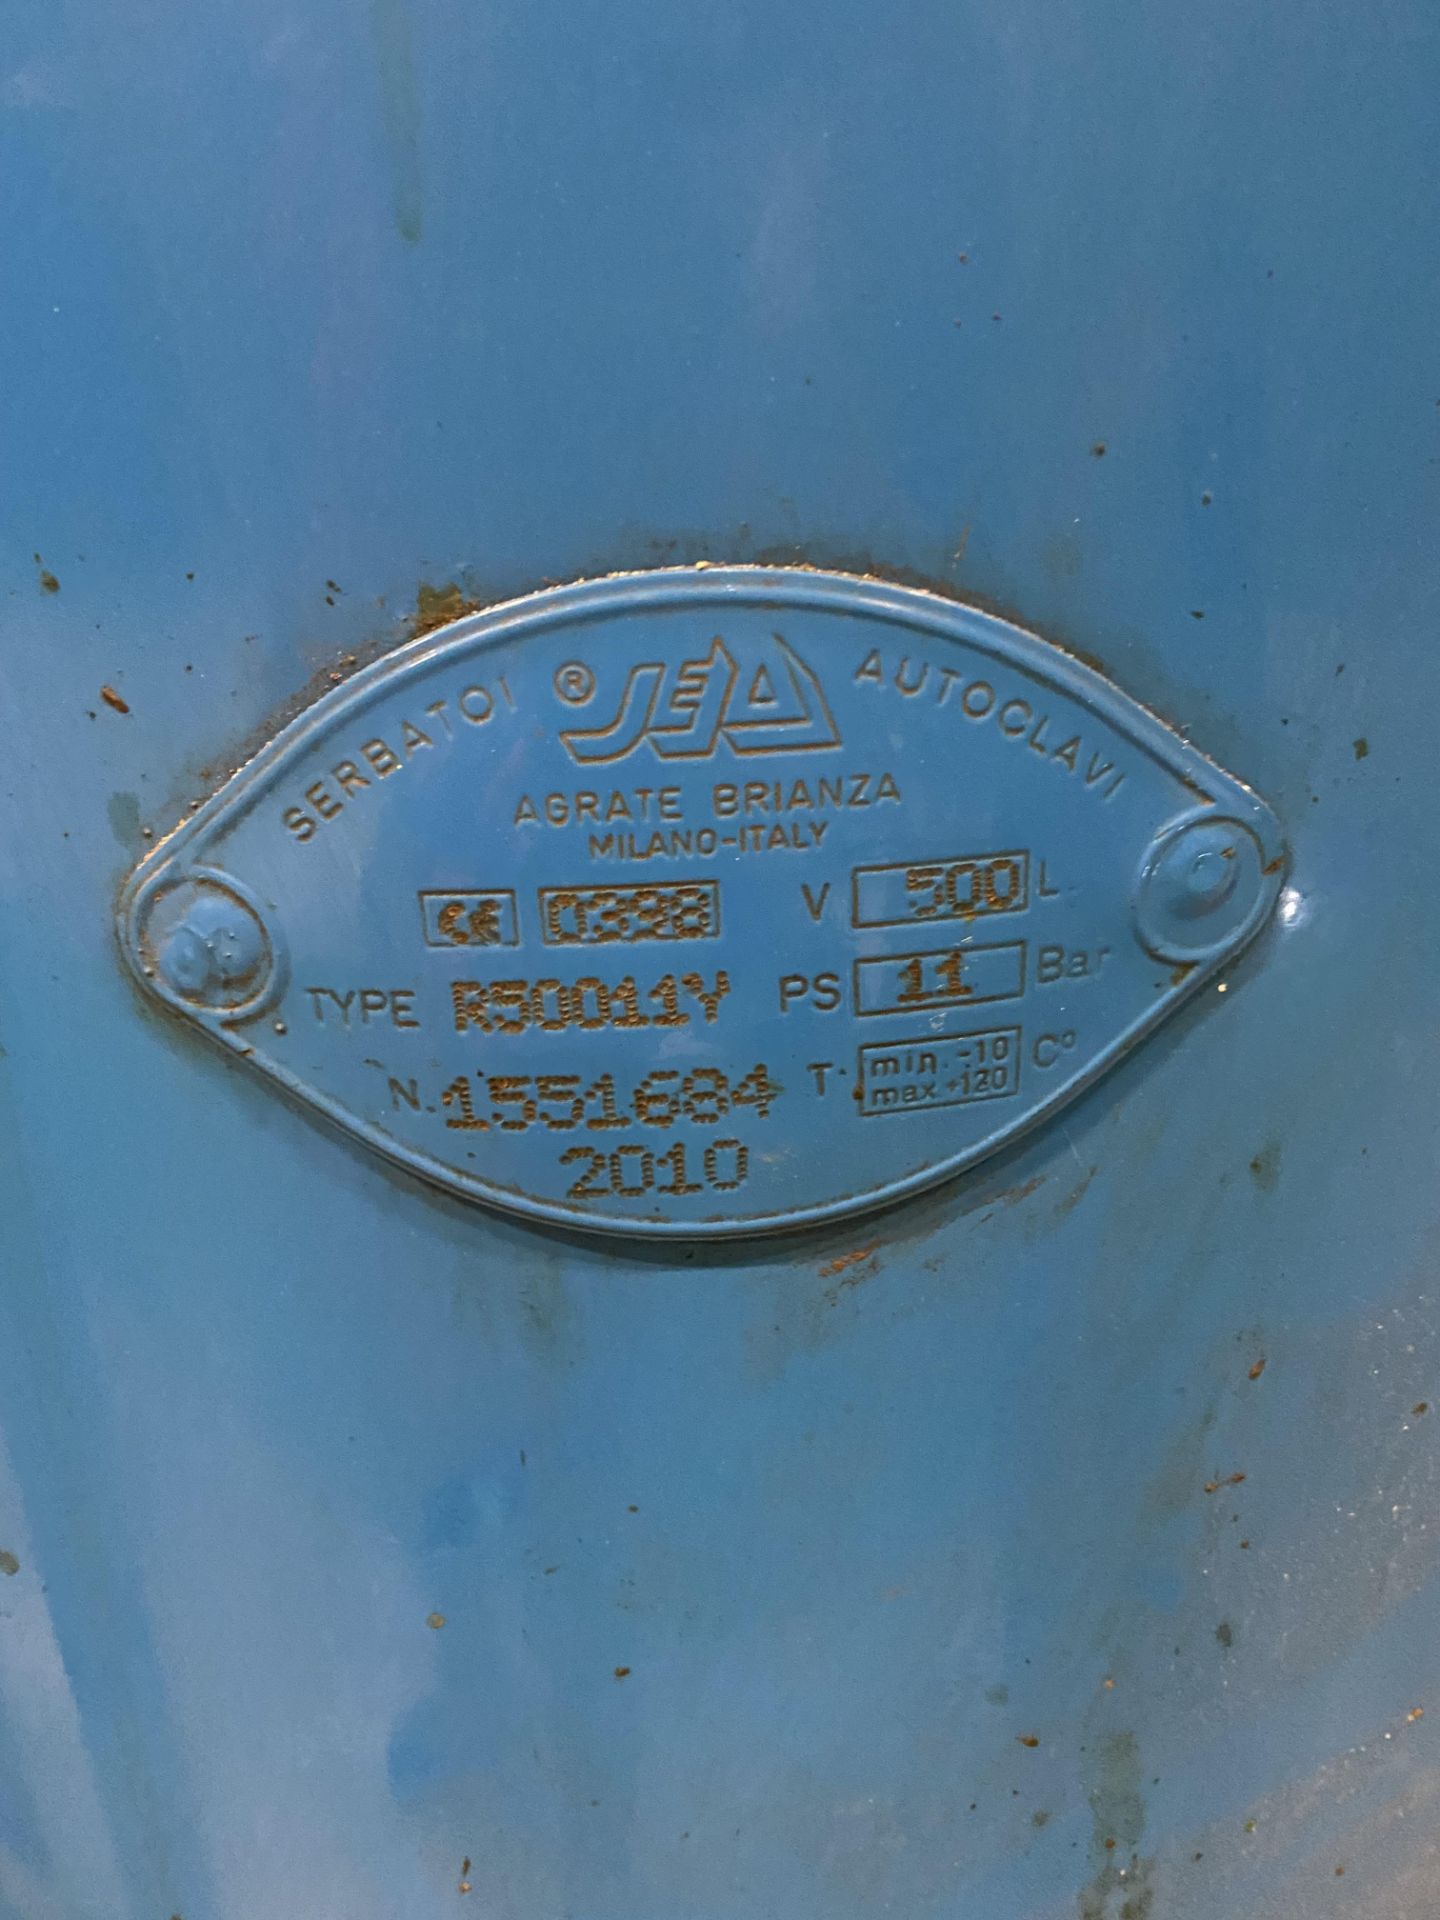 JED Type R500 11Y 500 litre Vertical Welded Steel Air Receiver, serial no. 15515684, year of - Image 2 of 2